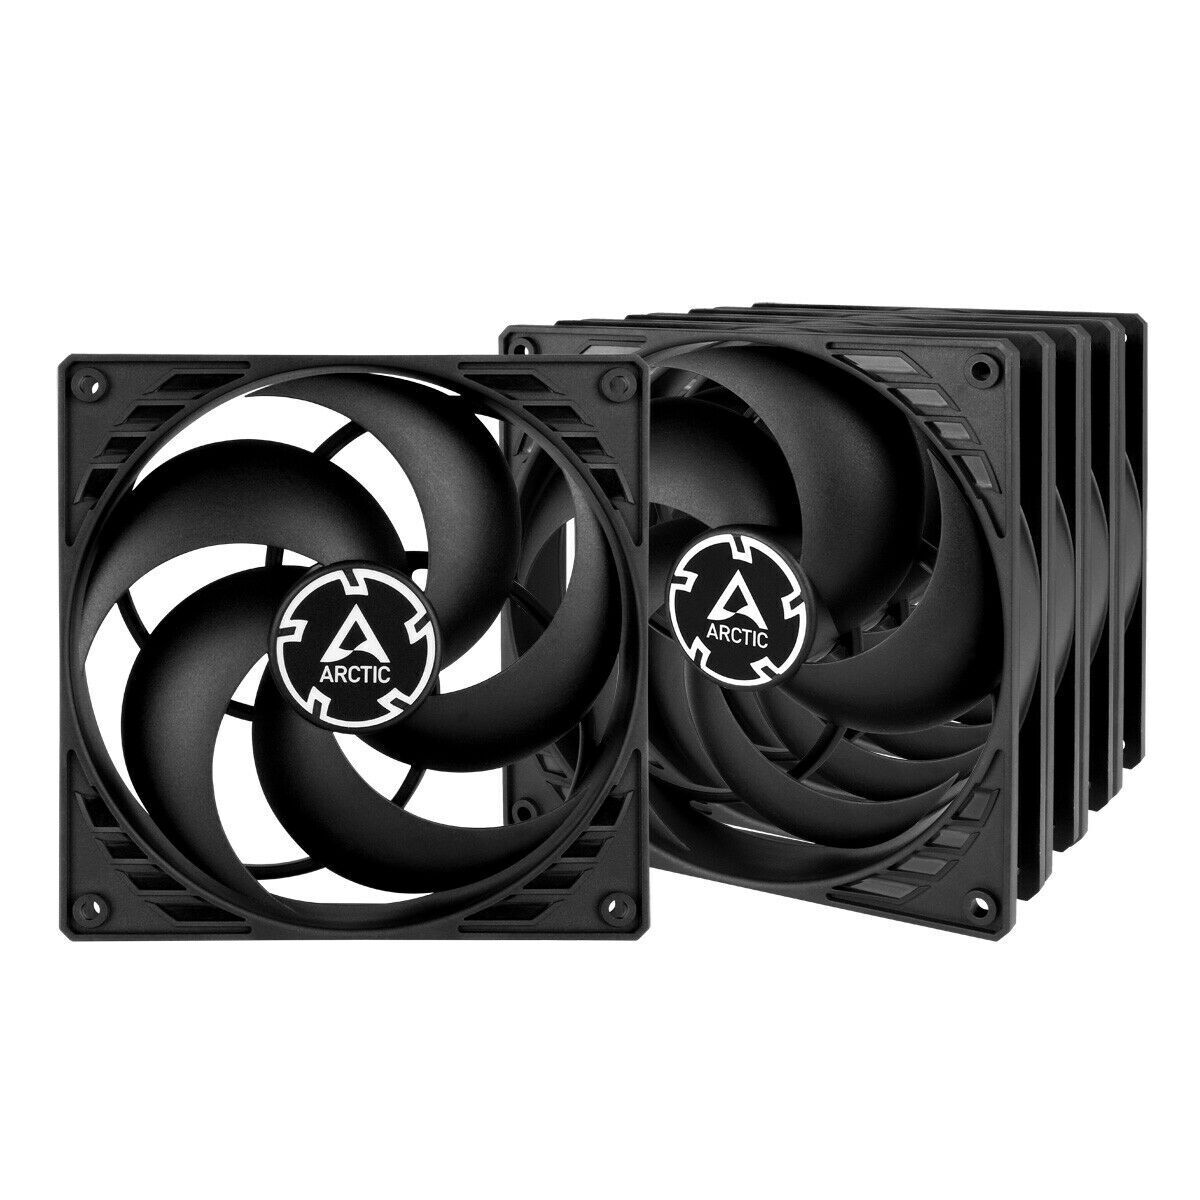 ARCTIC P14 PWM PST (Black) 5 Pack 140 mm Case Fan with PWM Sharing Technology PC